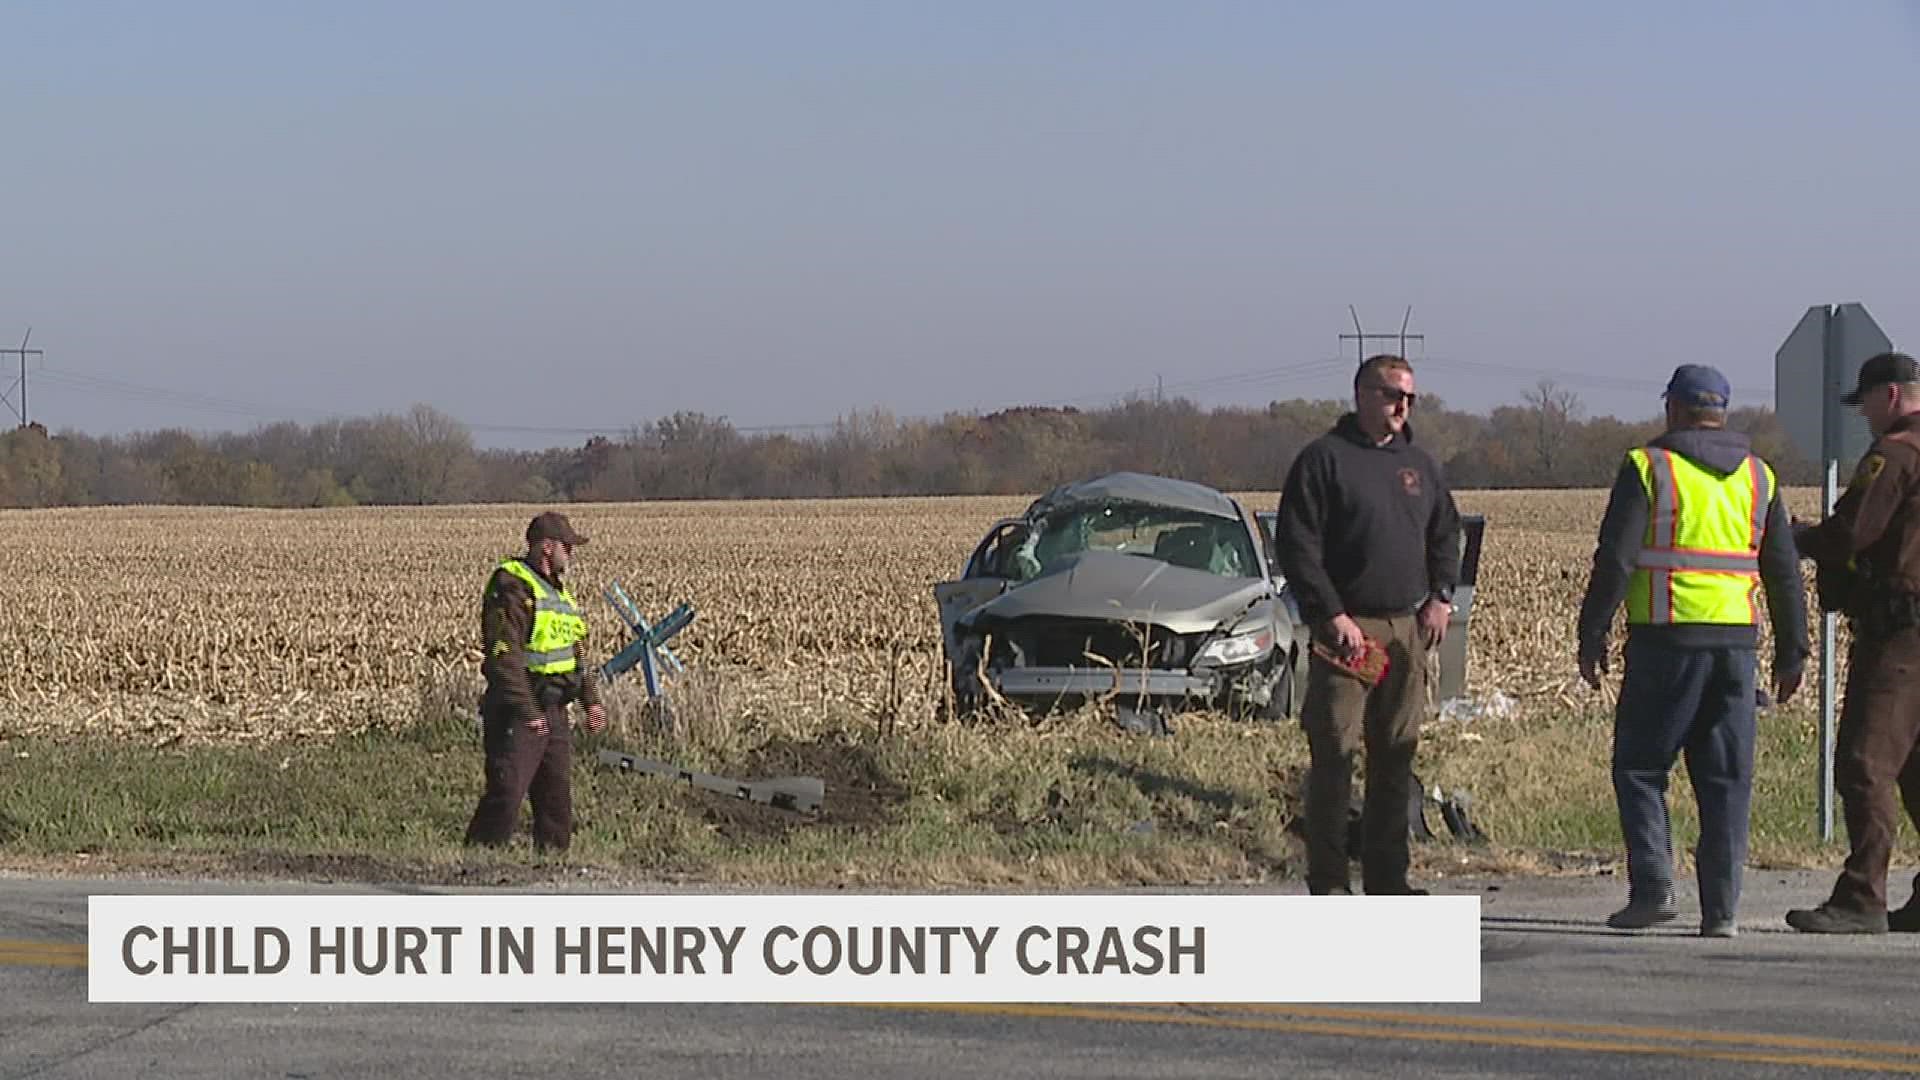 An infant was airlifted to the hospital after a serious crash on County Highway 12 Friday morning after one driver allegedly ignored a stop sign.